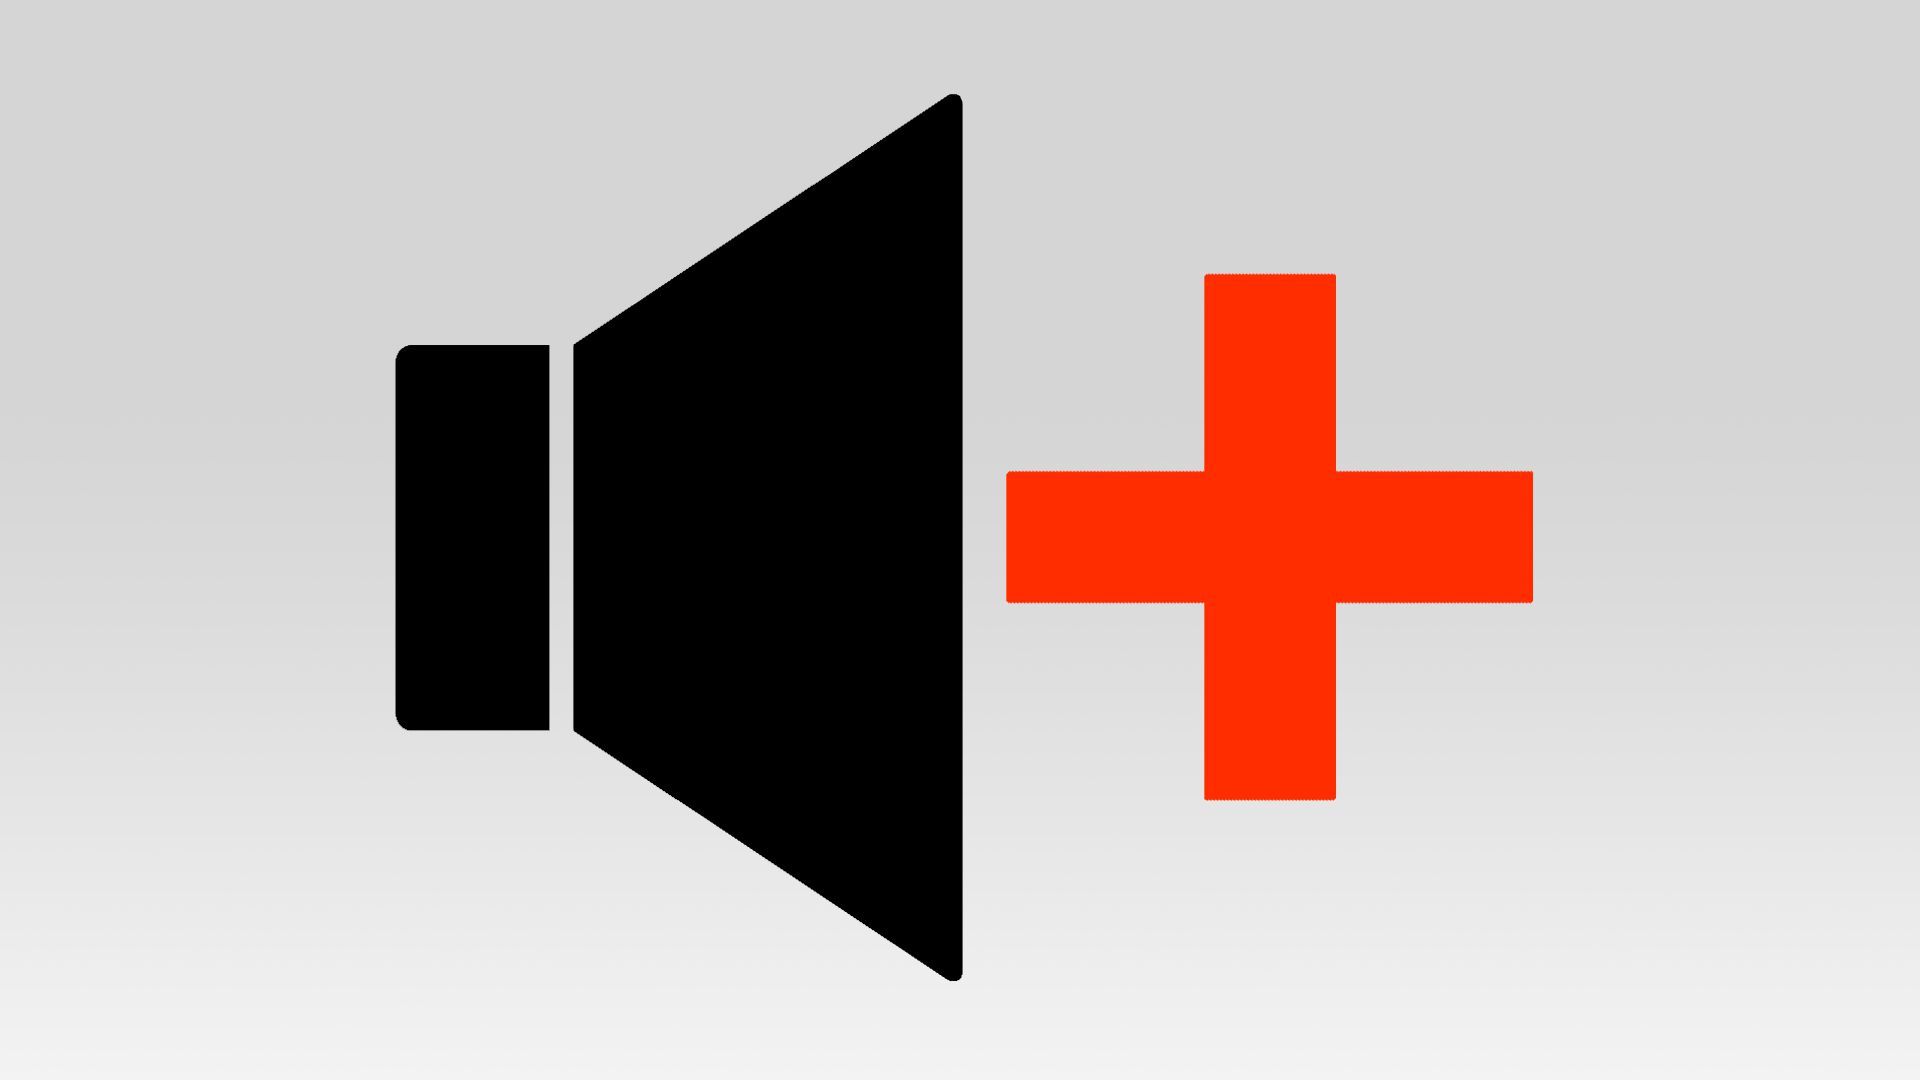 Illustration of a mute icon with the "X" rotated and turned into a red medical cross